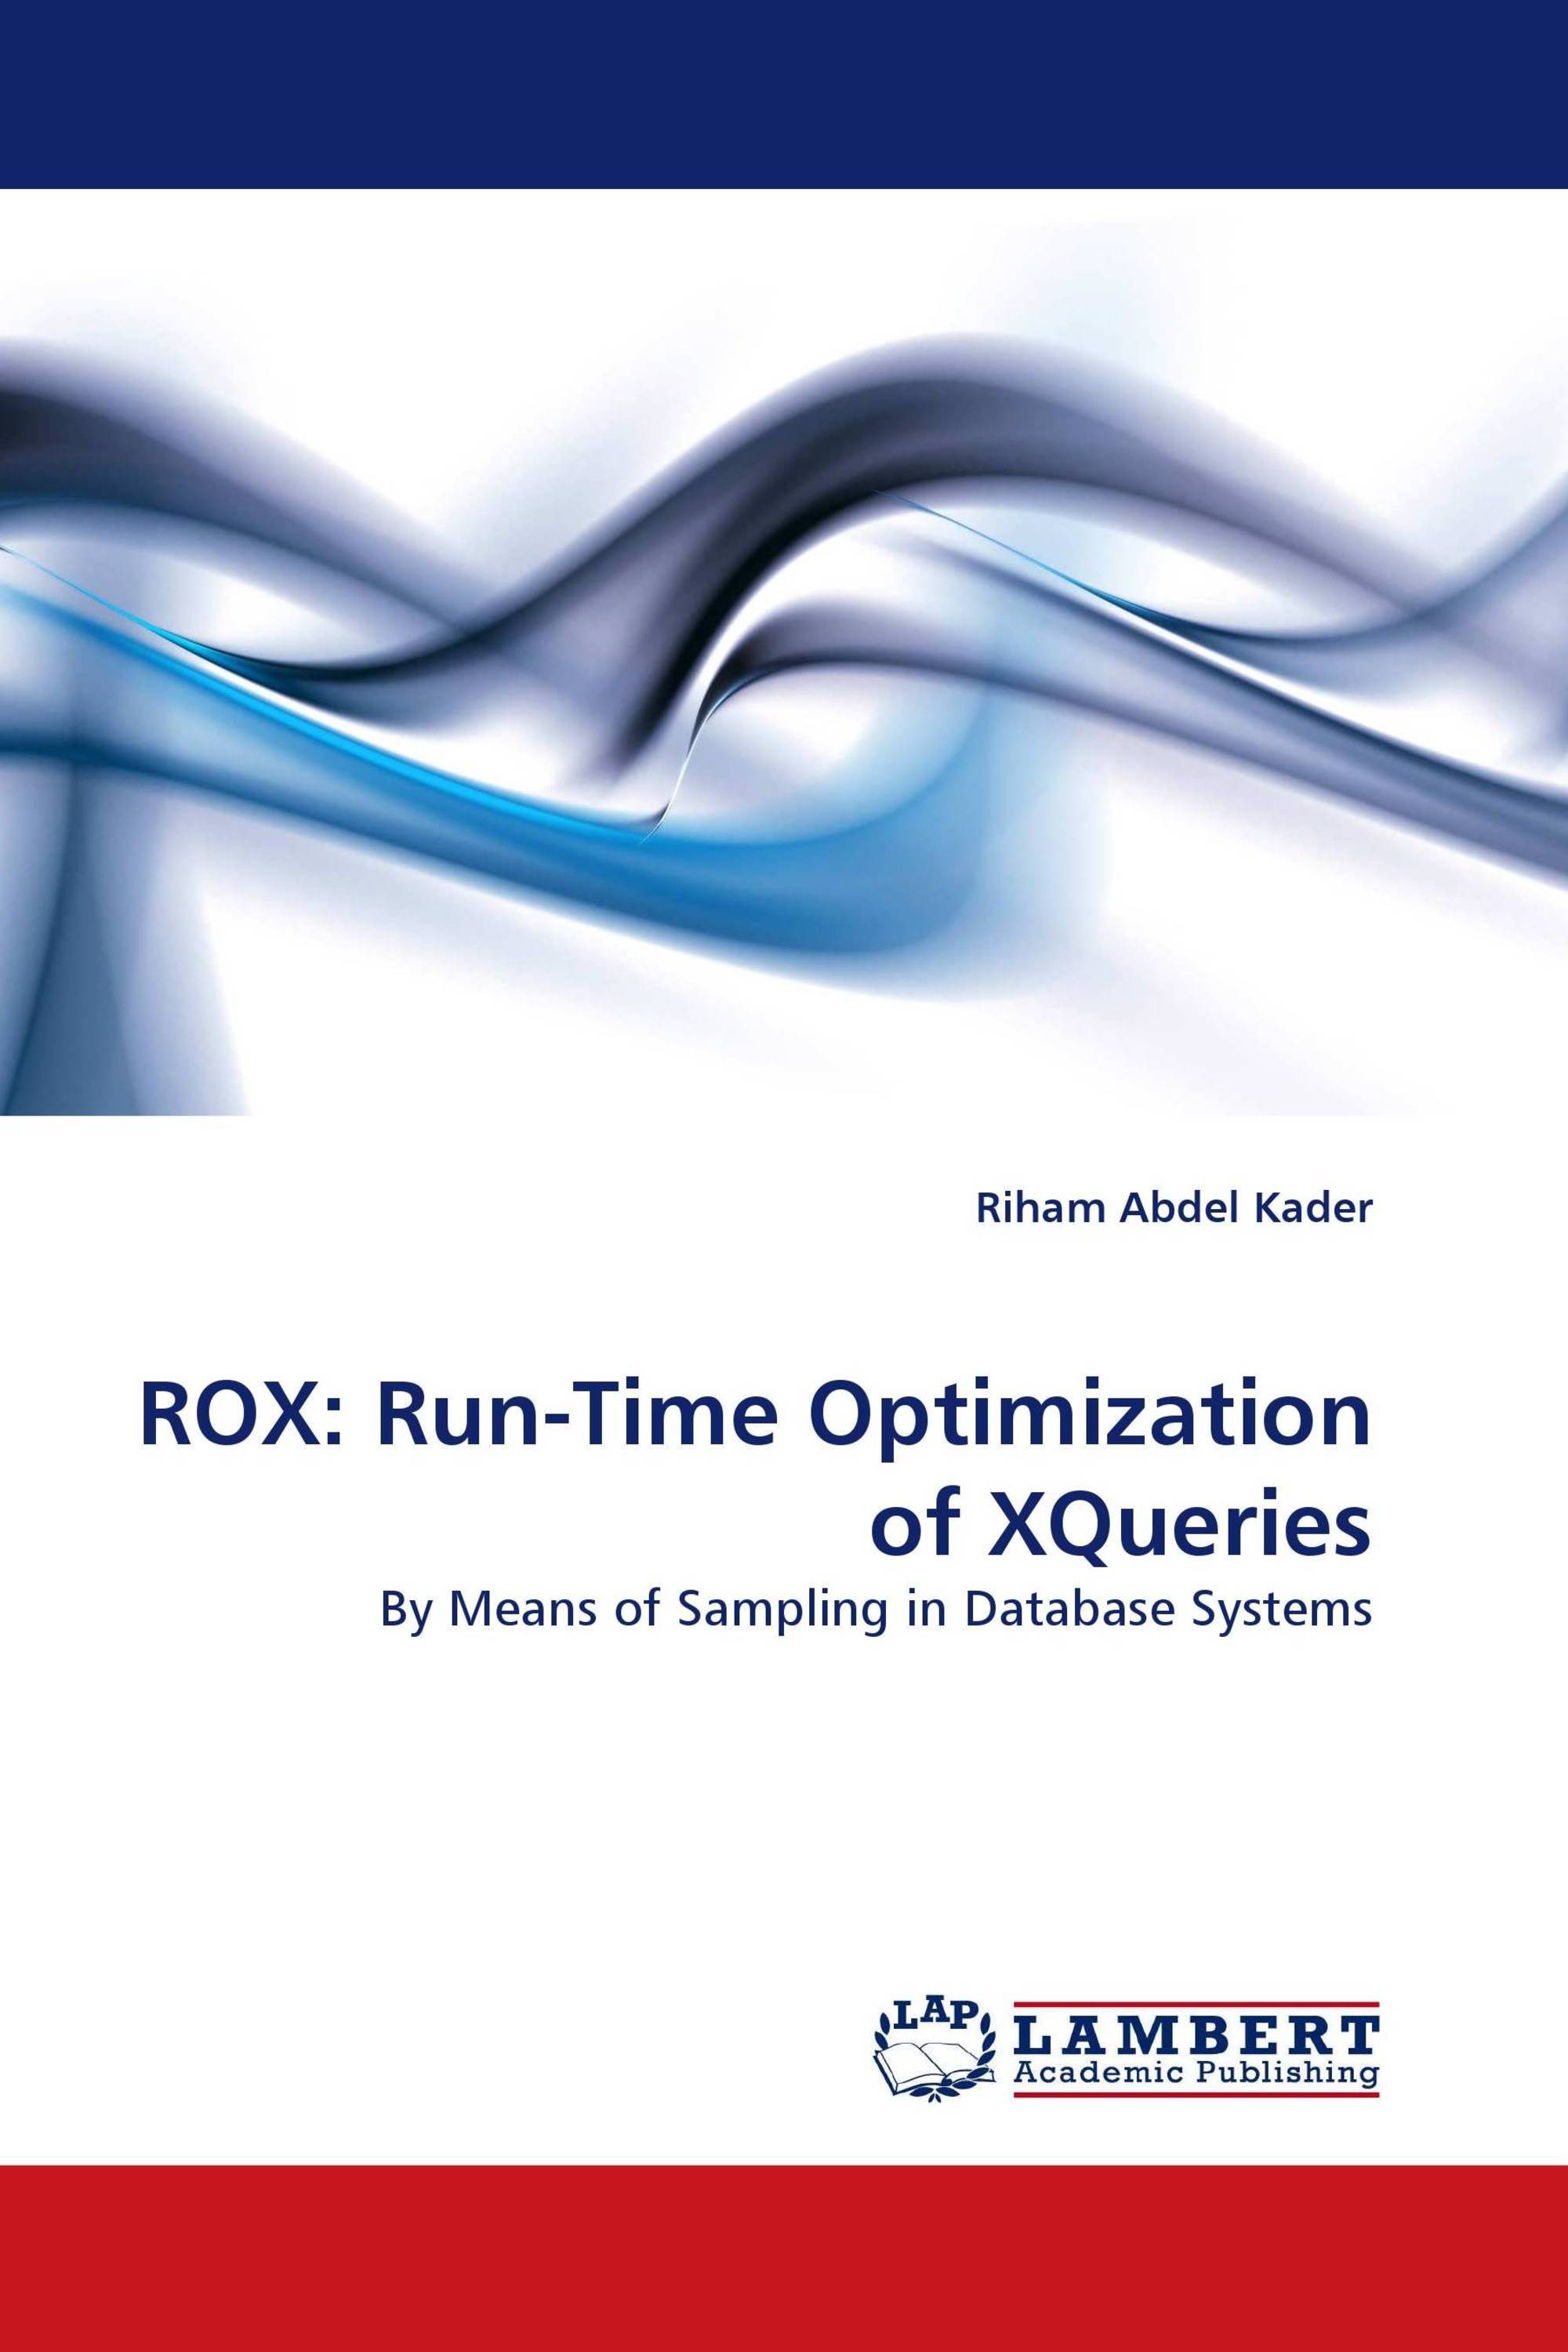 ROX: Run-Time Optimization of XQueries